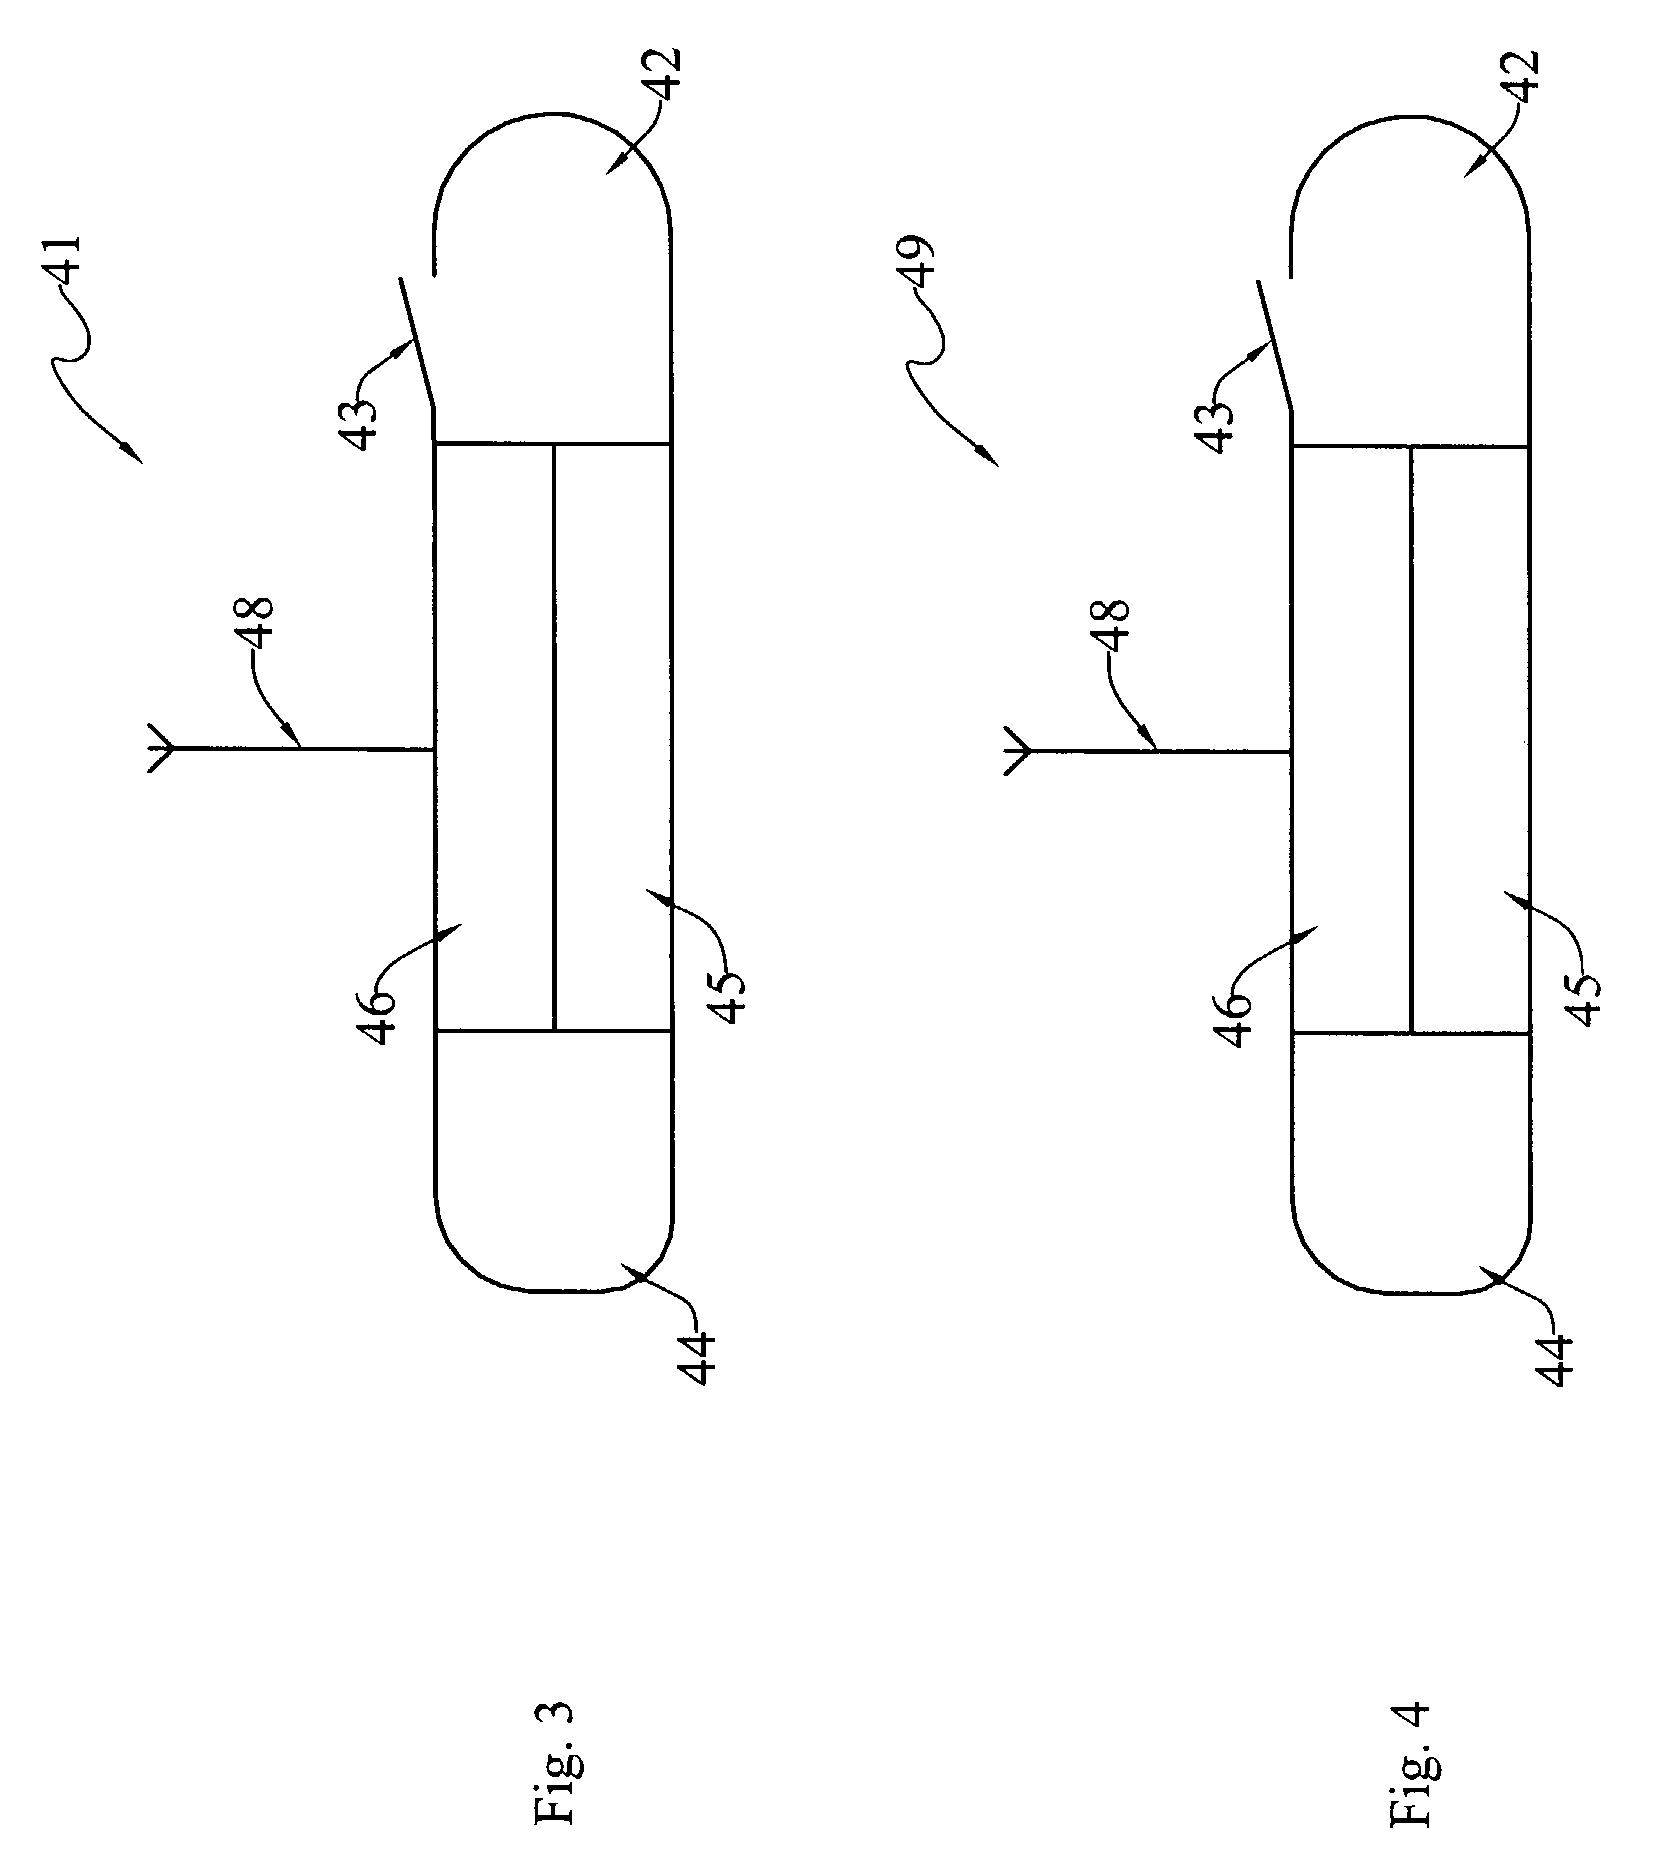 Method of using, and determining location of, an ingestible capsule